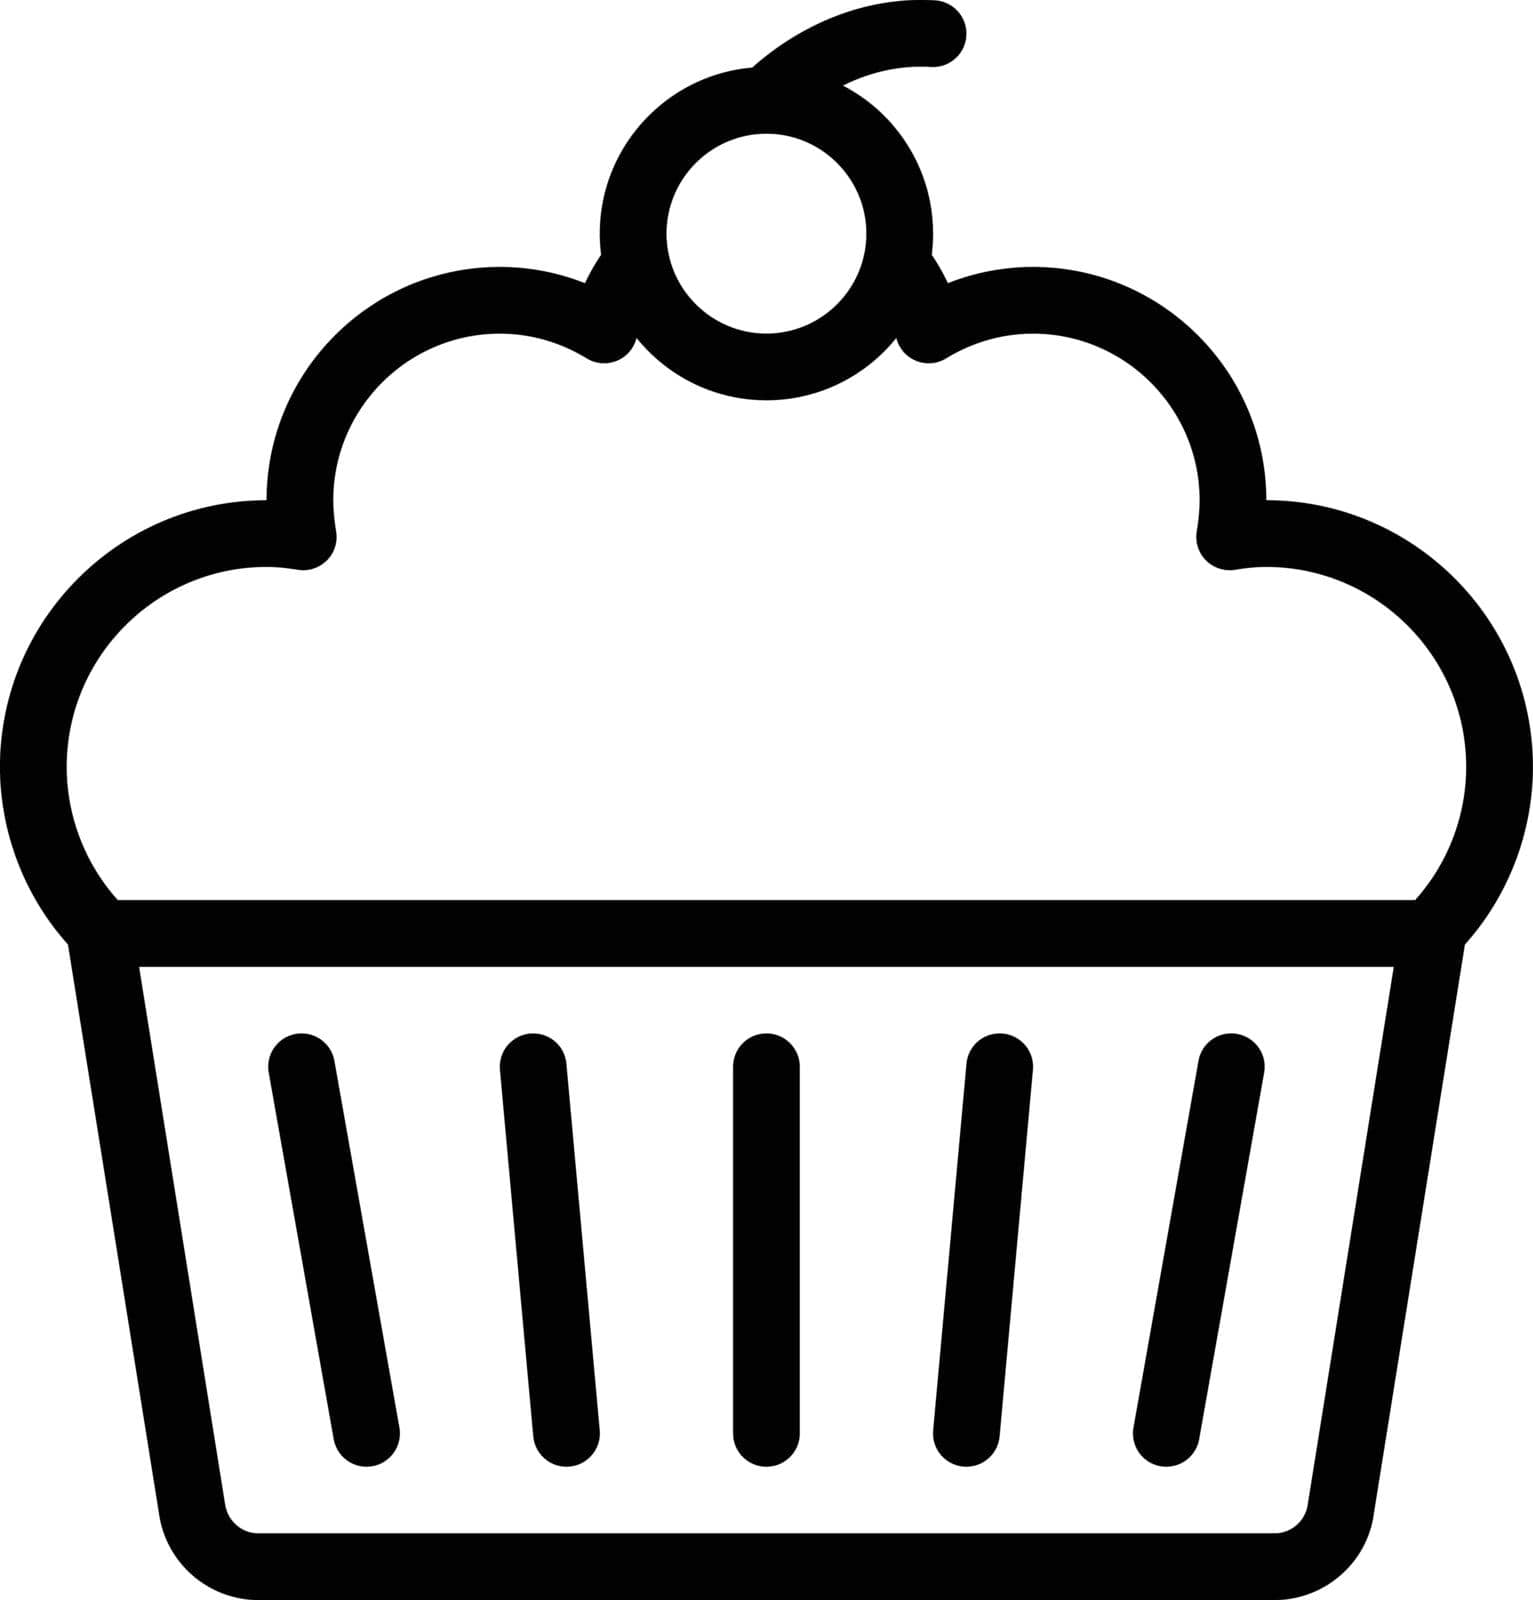 cupcake Vector illustration on a transparent background. Premium quality symmbols. Thin line vector icons for concept and graphic design.